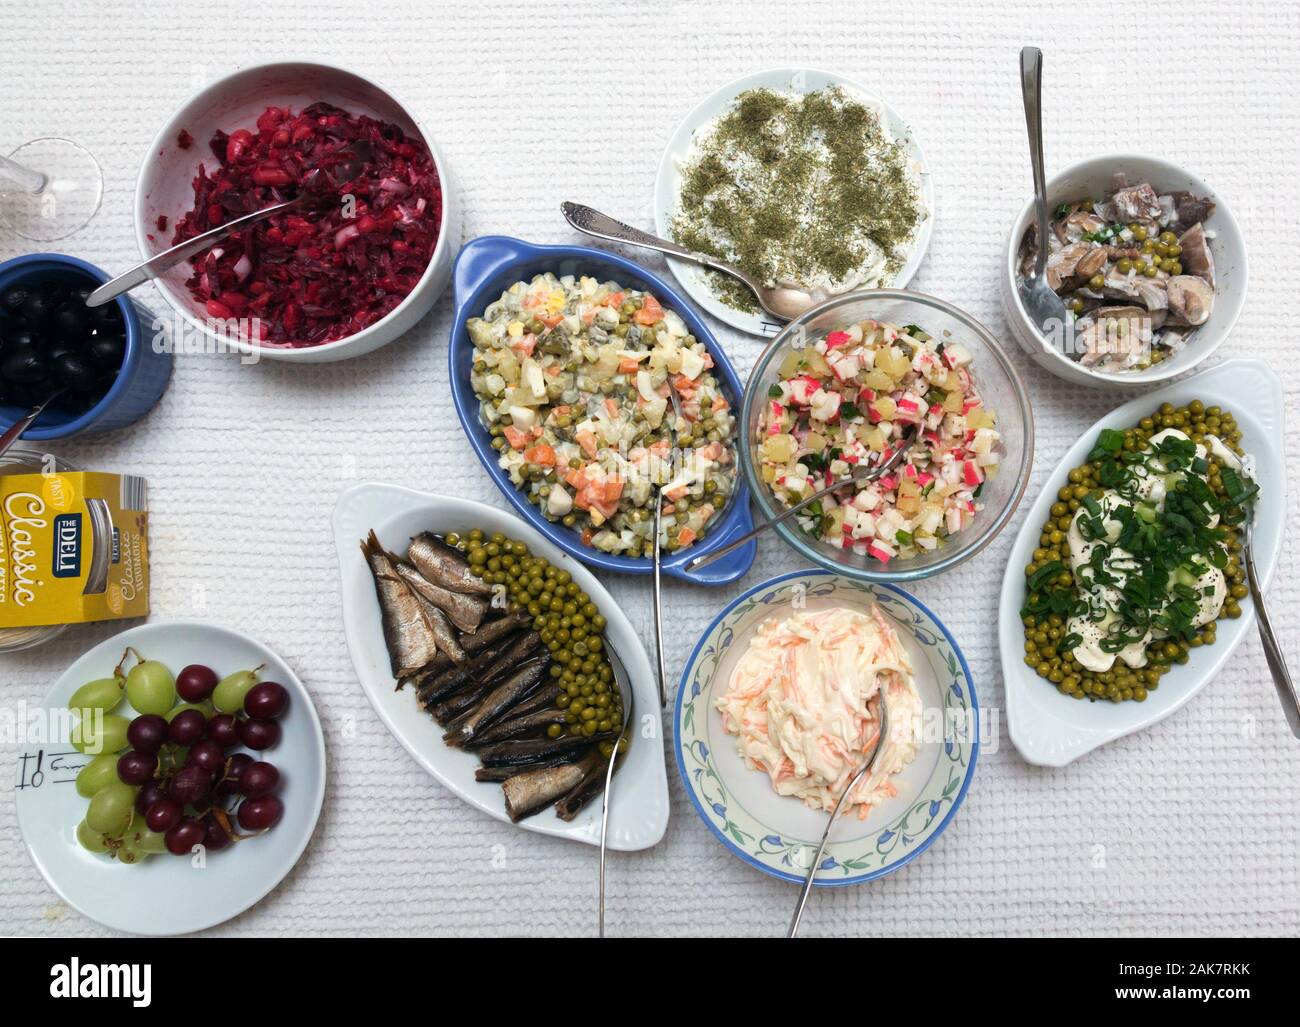 Lithuanian food dishes on table Stock Photo